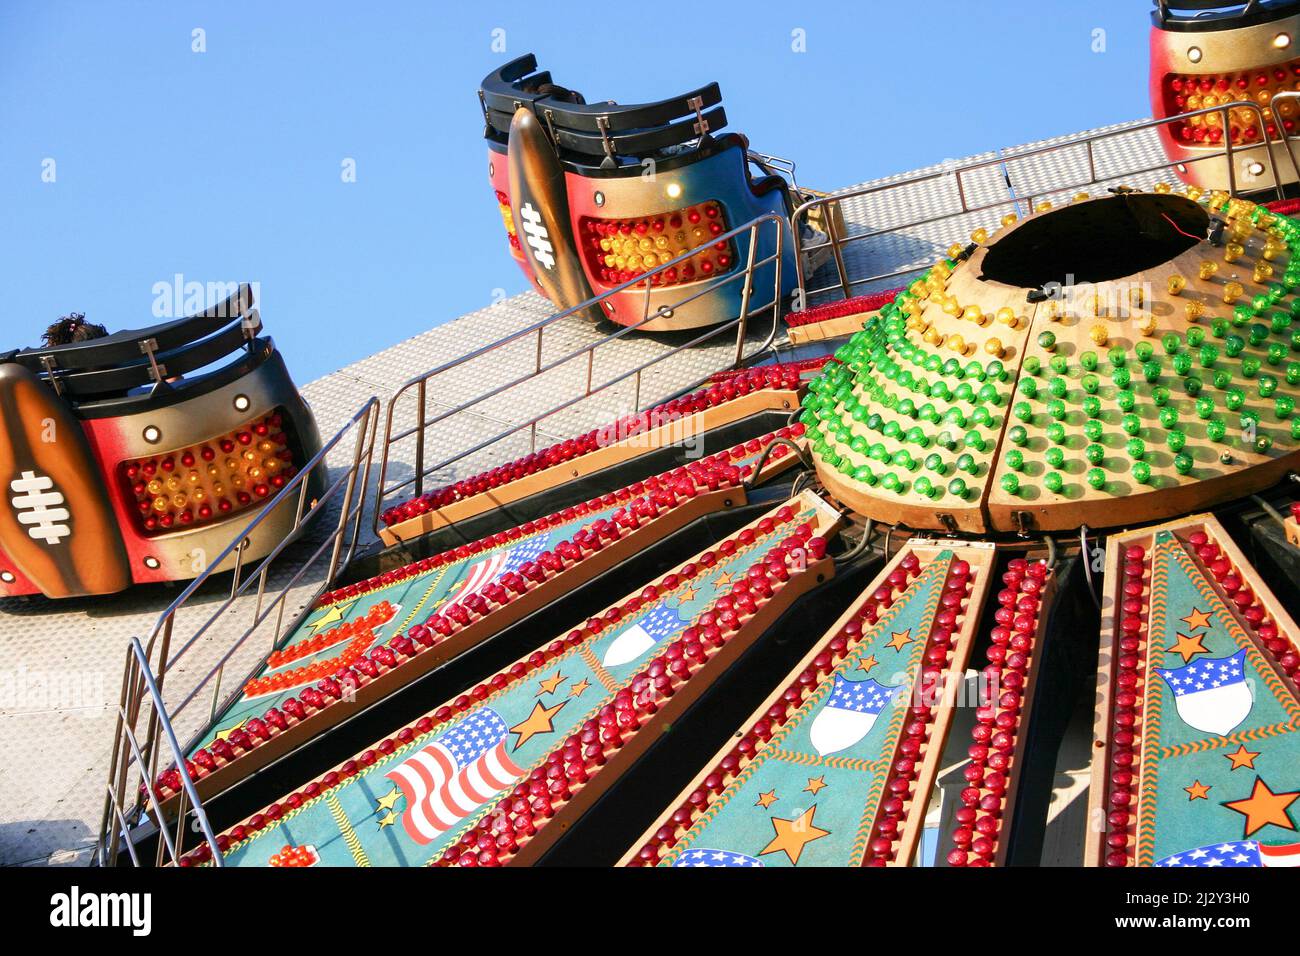 Fairground ride. A brightly decorated and illuminated American style Waltzer ride raising to a vertical position. Stock Photo